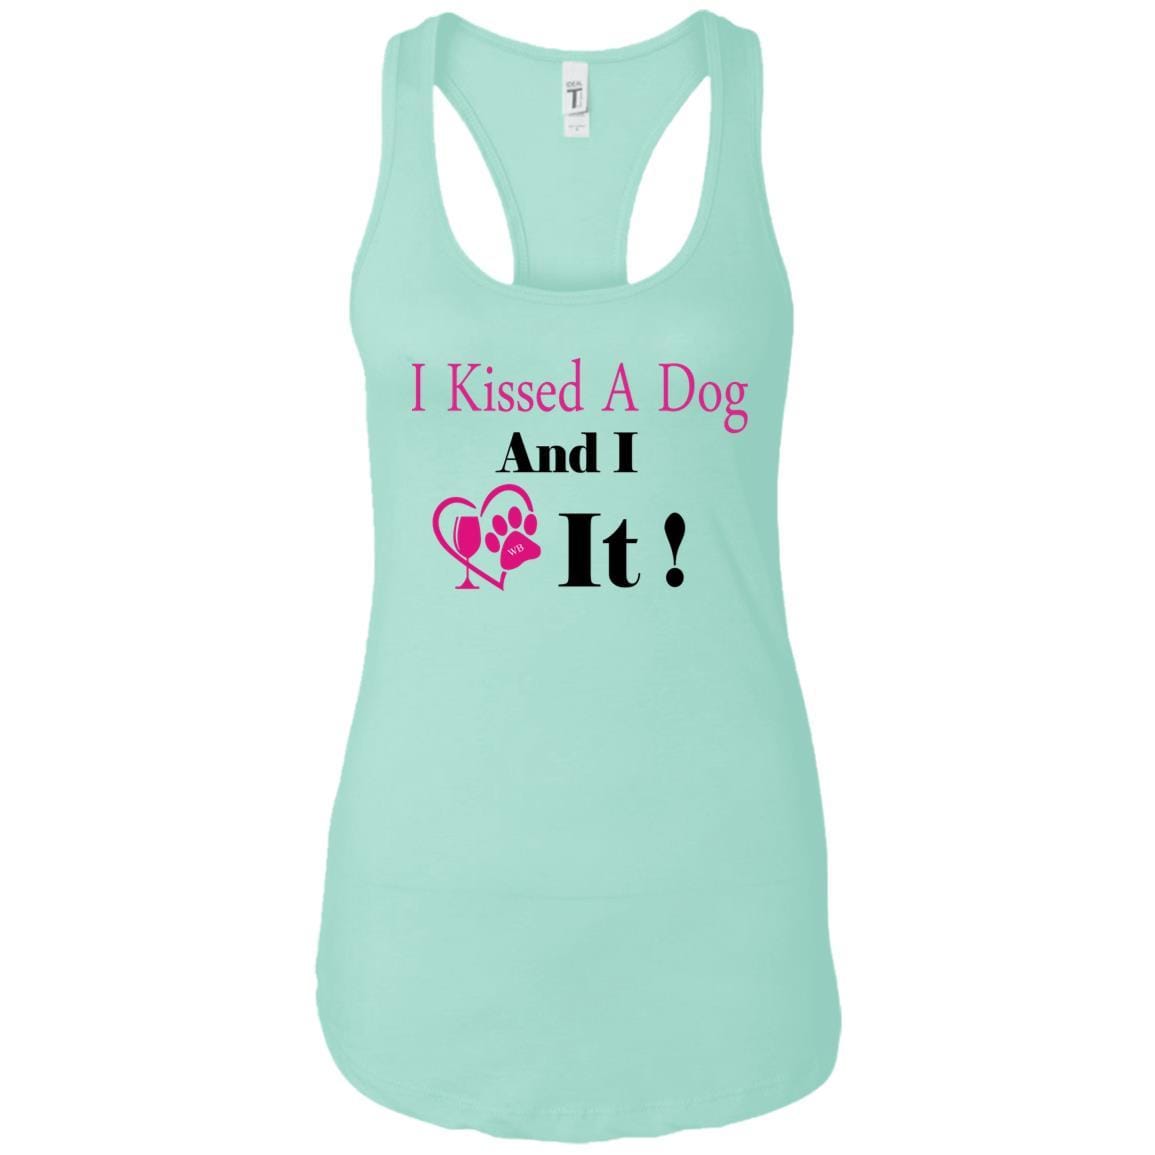 Tank Top Mint / X-Small WineyBitches.co "I Kissed A Dog And I Loved It:" Ladies Ideal Racerback Tank WineyBitchesCo